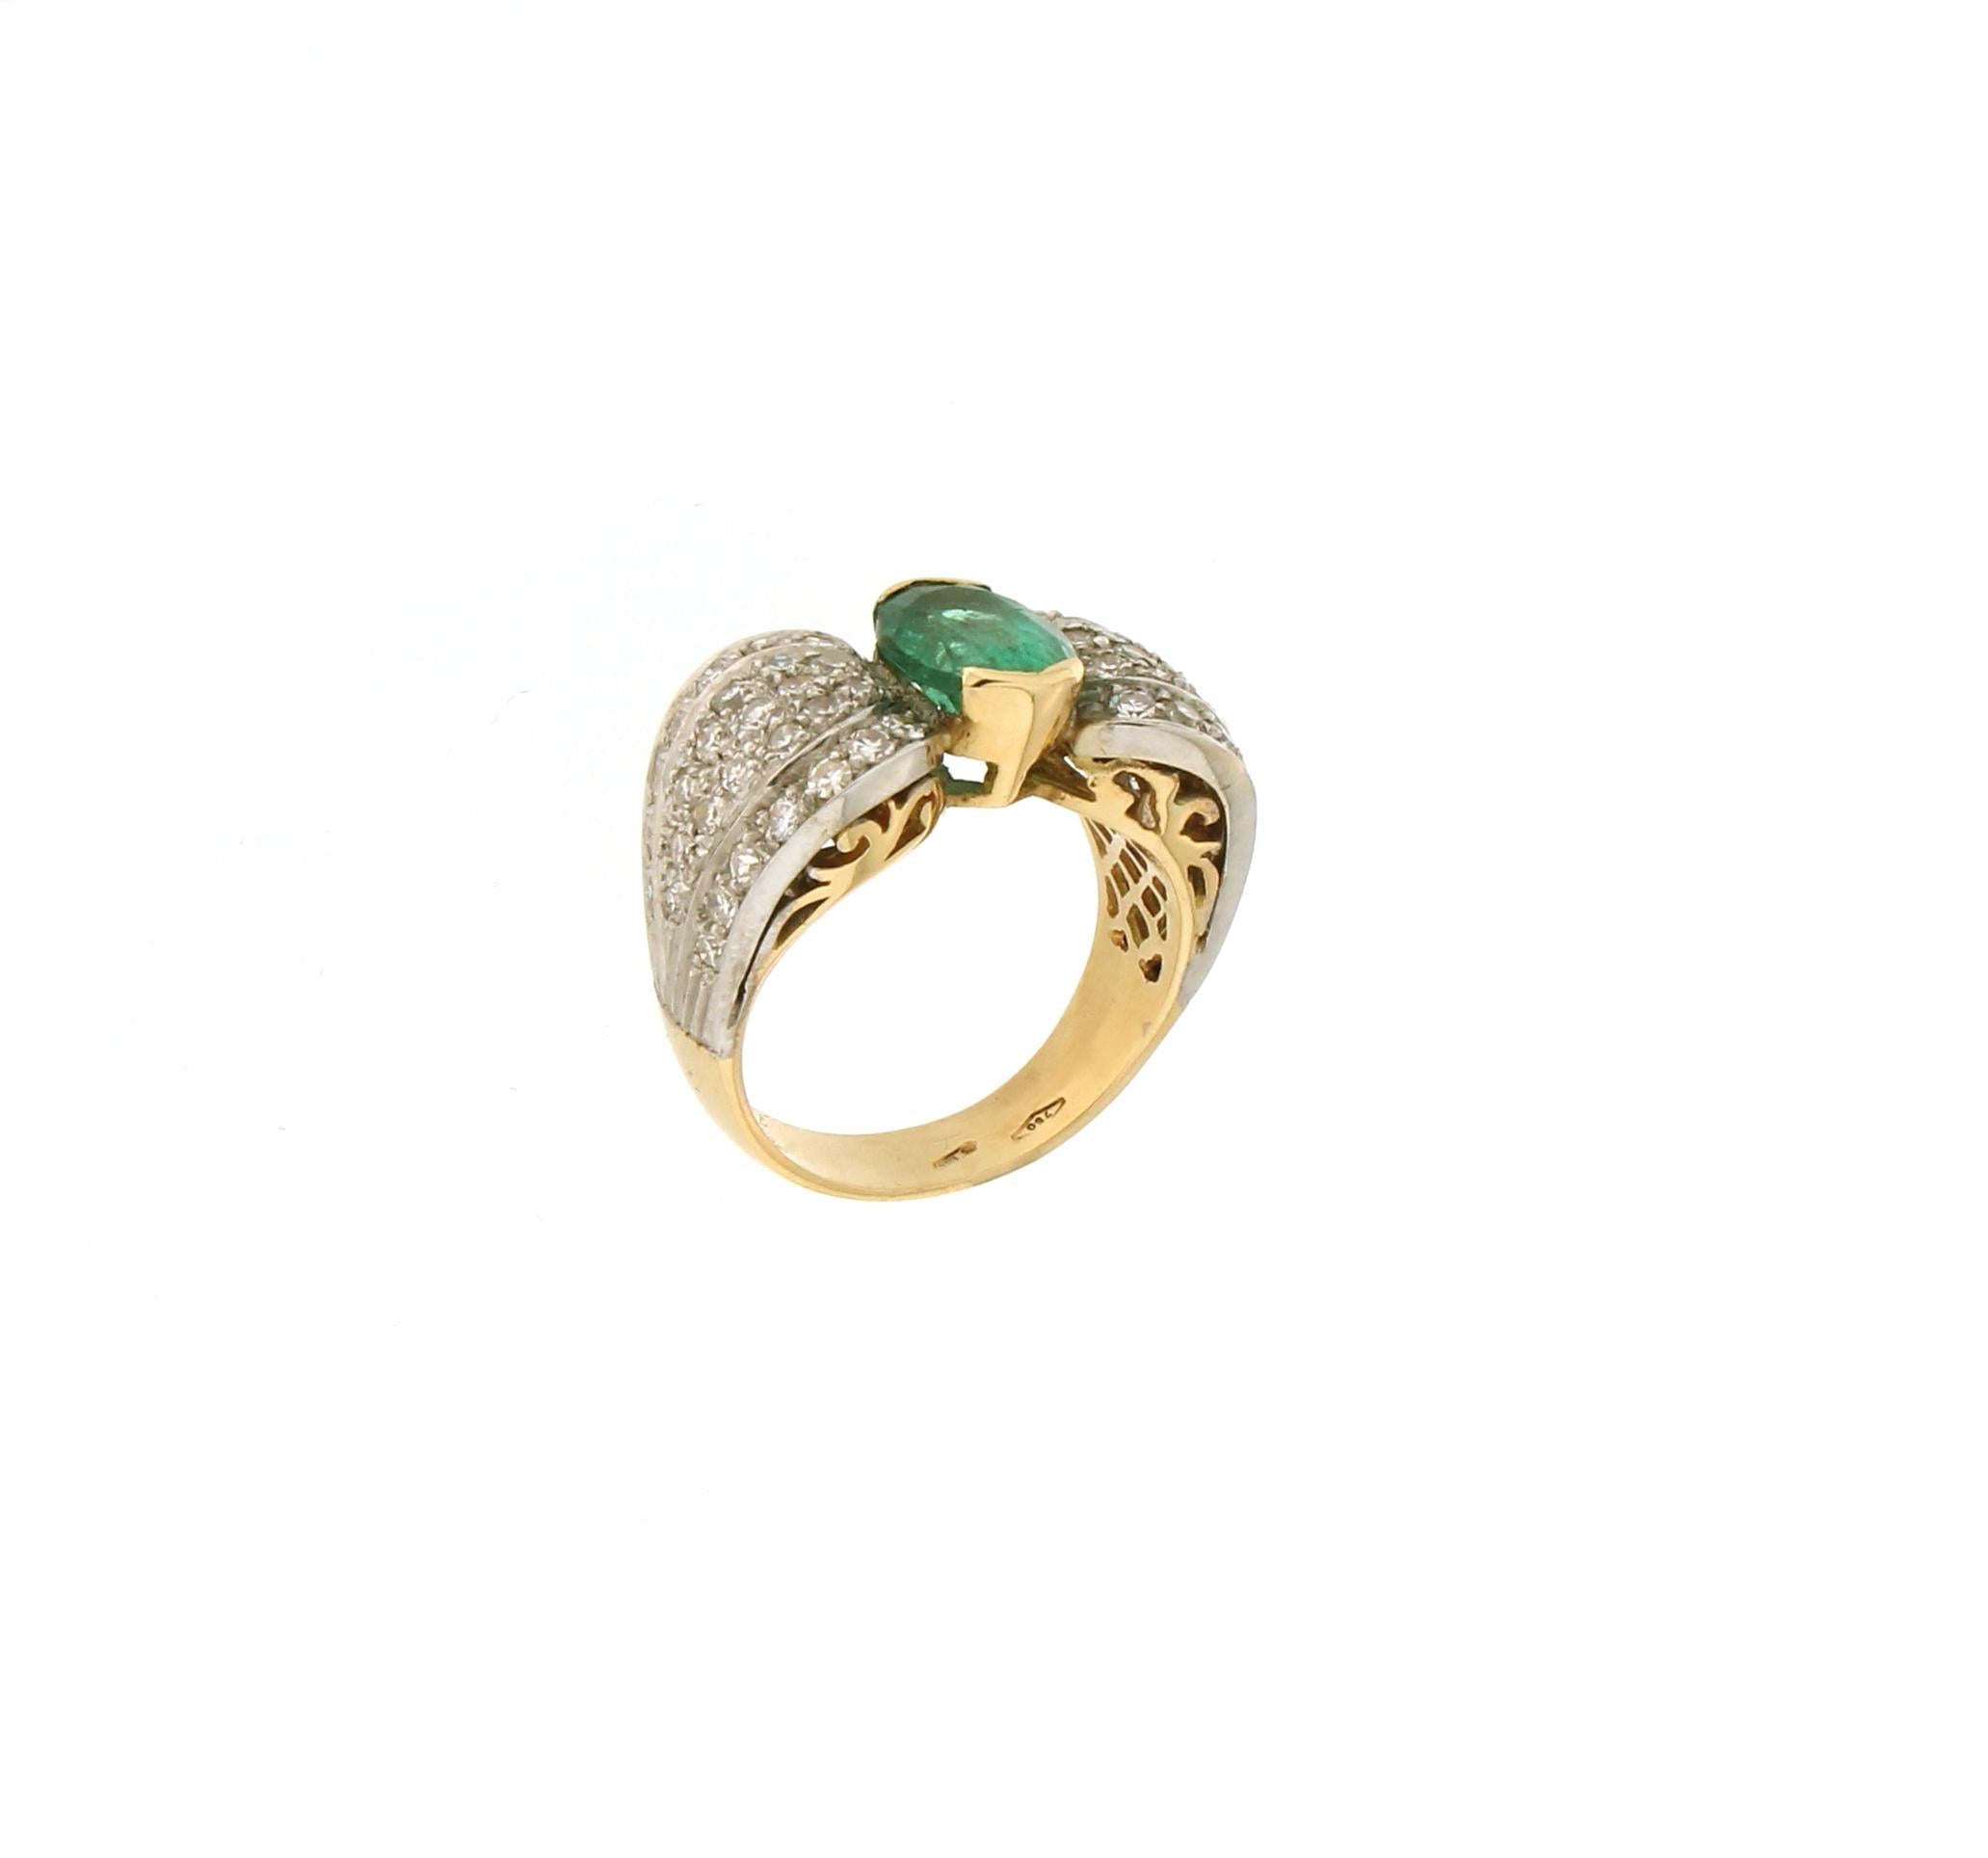 Handcraft Brazilian Emerald 18 Karat Yellow and White Gold Diamond Cocktail Ring In New Condition For Sale In Marcianise, IT